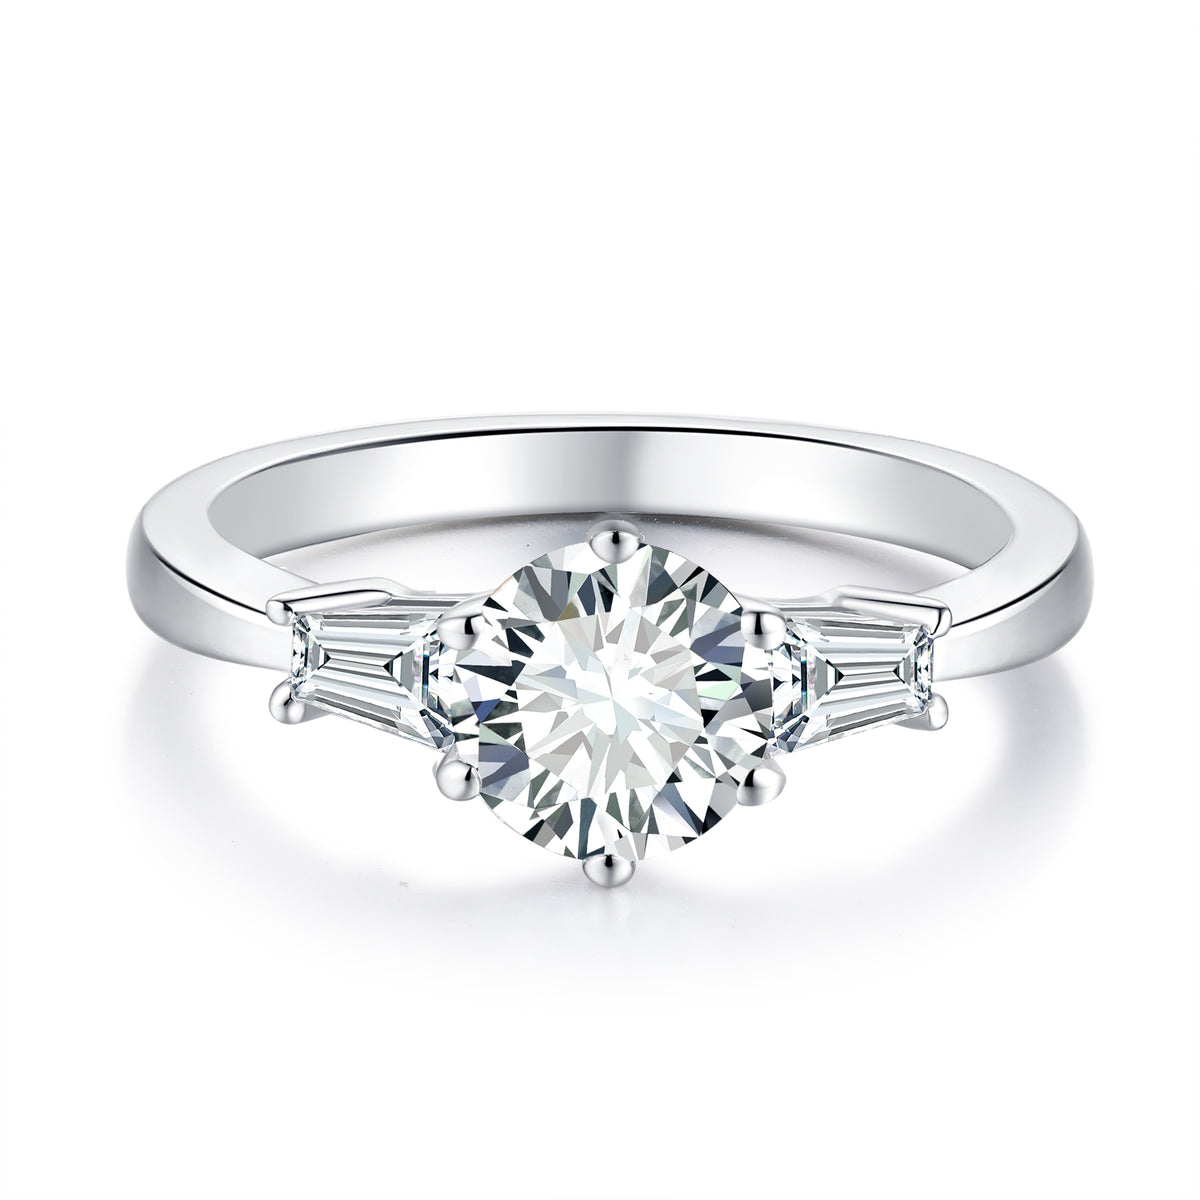 【02LIVE # link 12 - BUY 1 GET 1 free ring】 S925 Moissanite Both sides Rings 1/2Carat RM1028